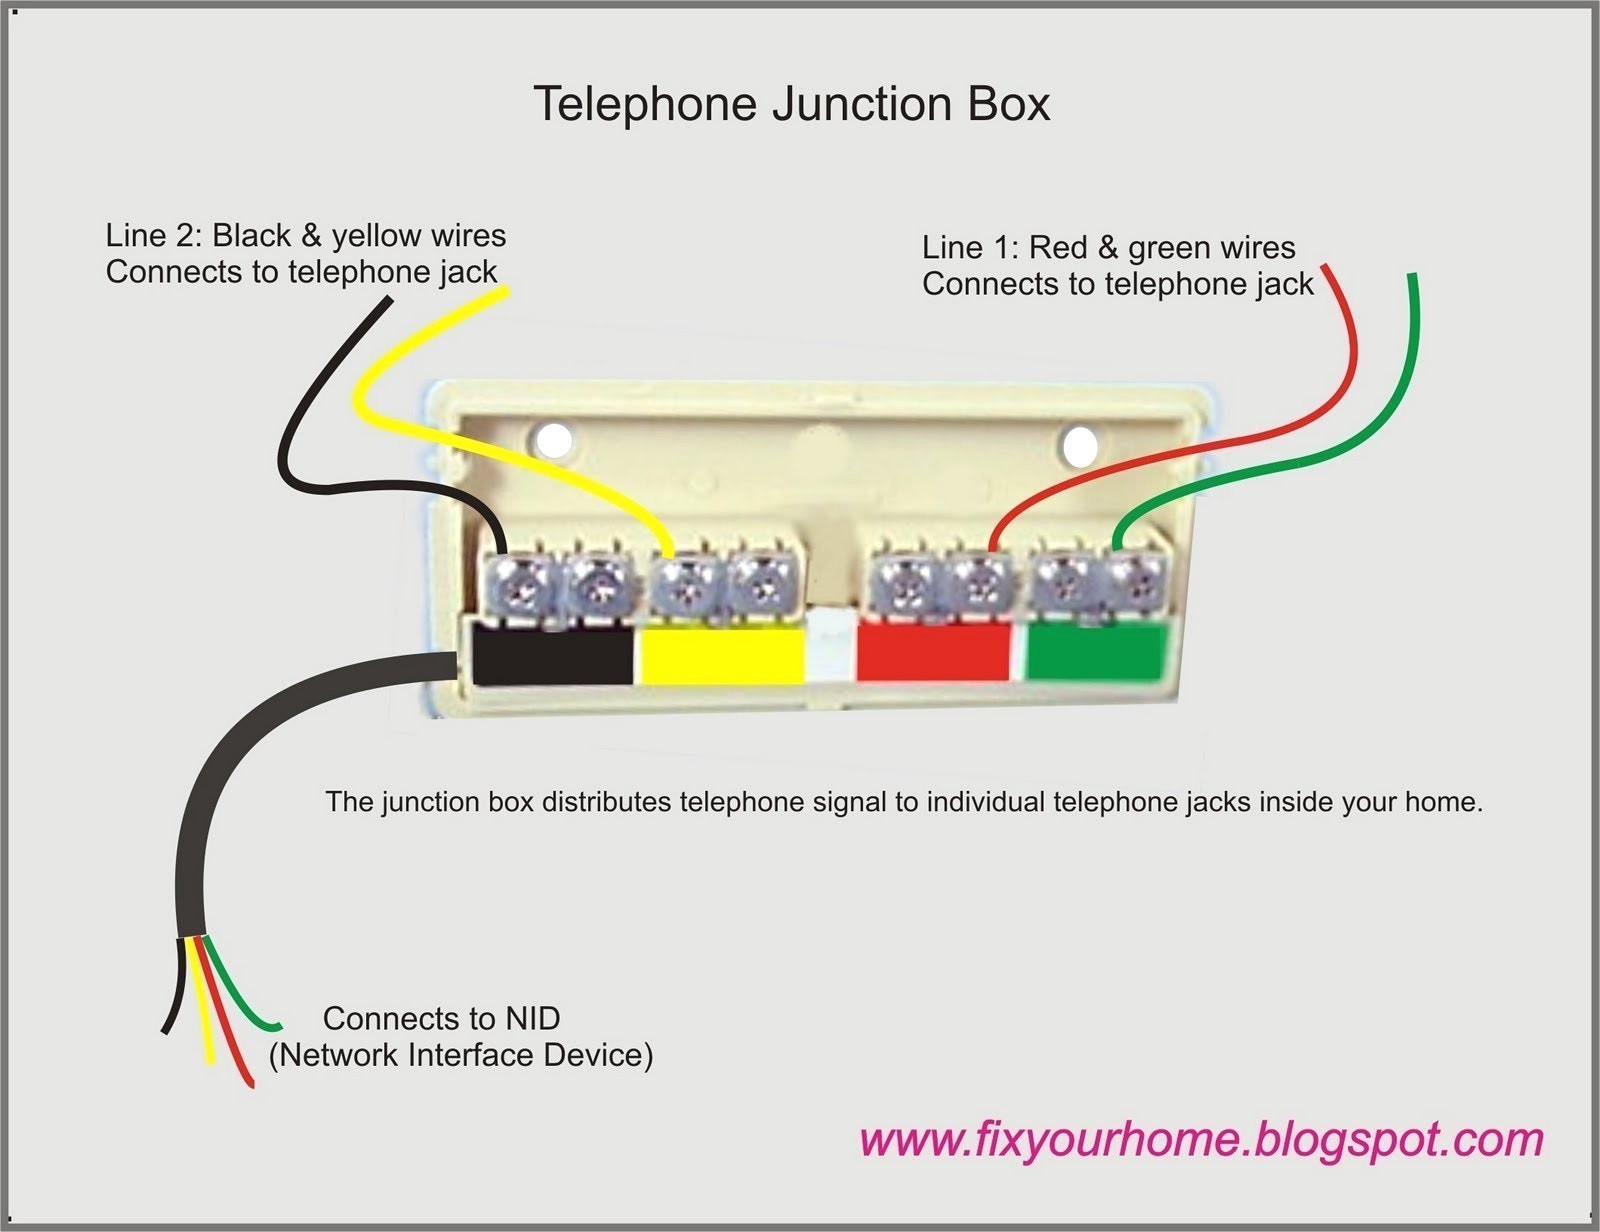 cast Home Wiring Diagram New Diagram to Her with Home Telephone Wiring Diagram Telephone